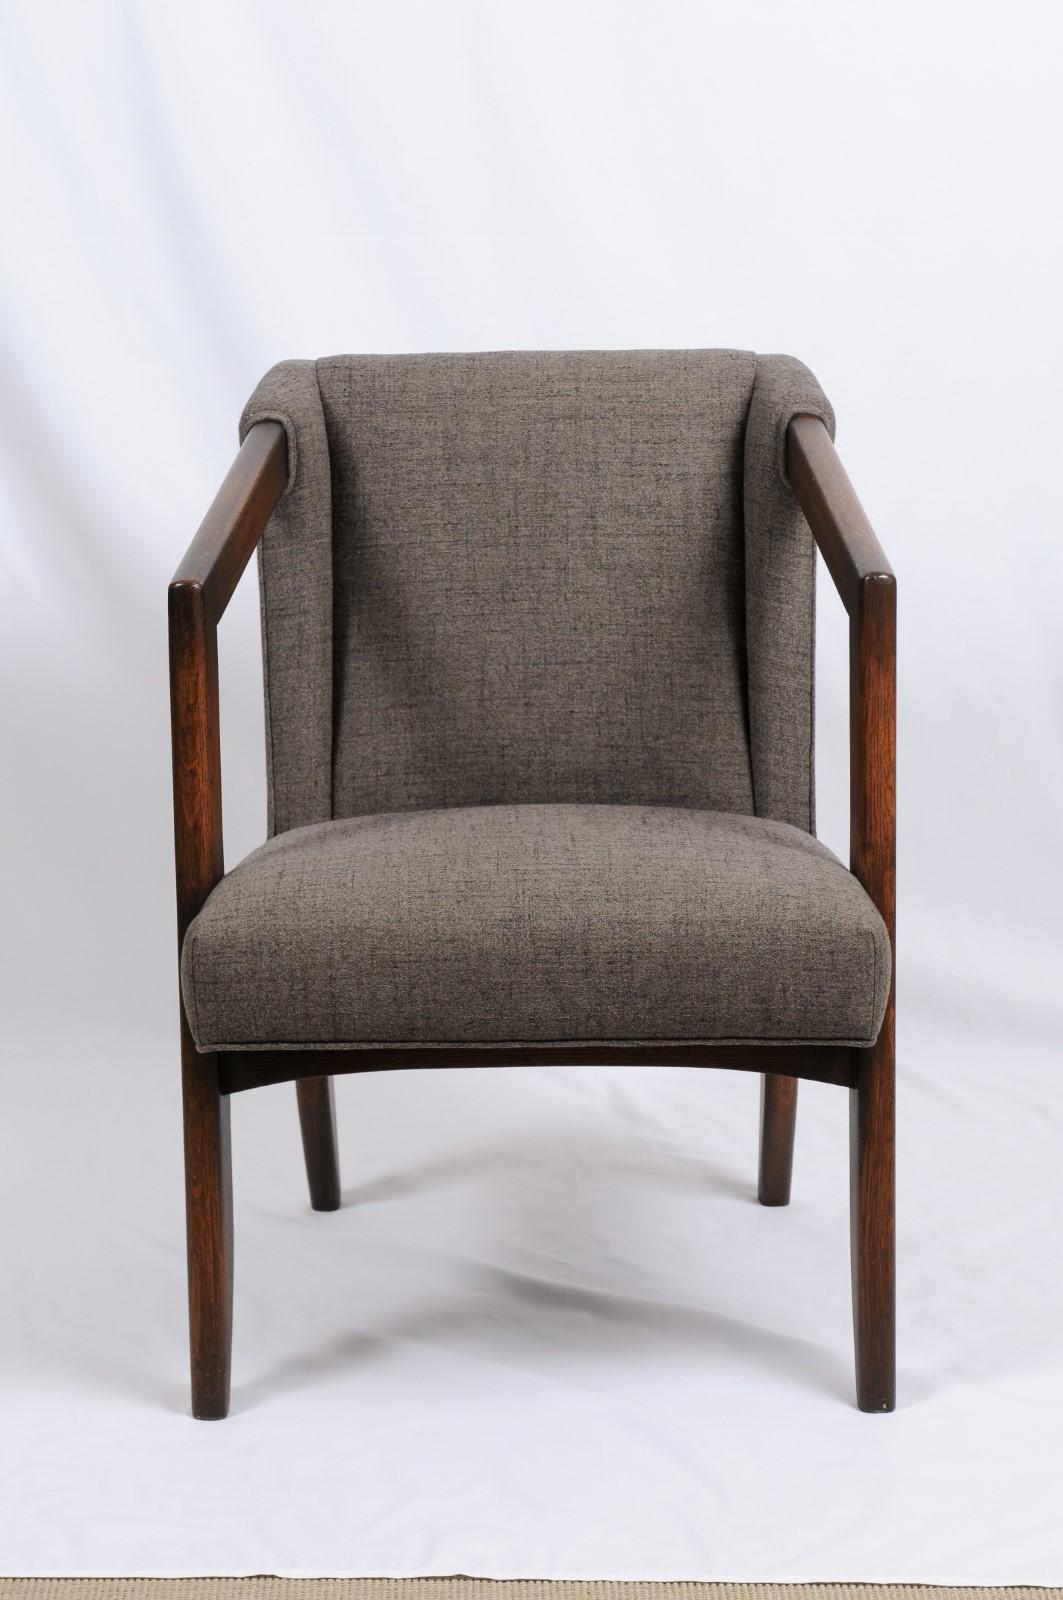 A custom-created James Mont lounge chair, New York, 1960s,
Provenance: sold by the original New York owner who commissioned the artist to create it;
Stained oak, upholstered in Brentano 